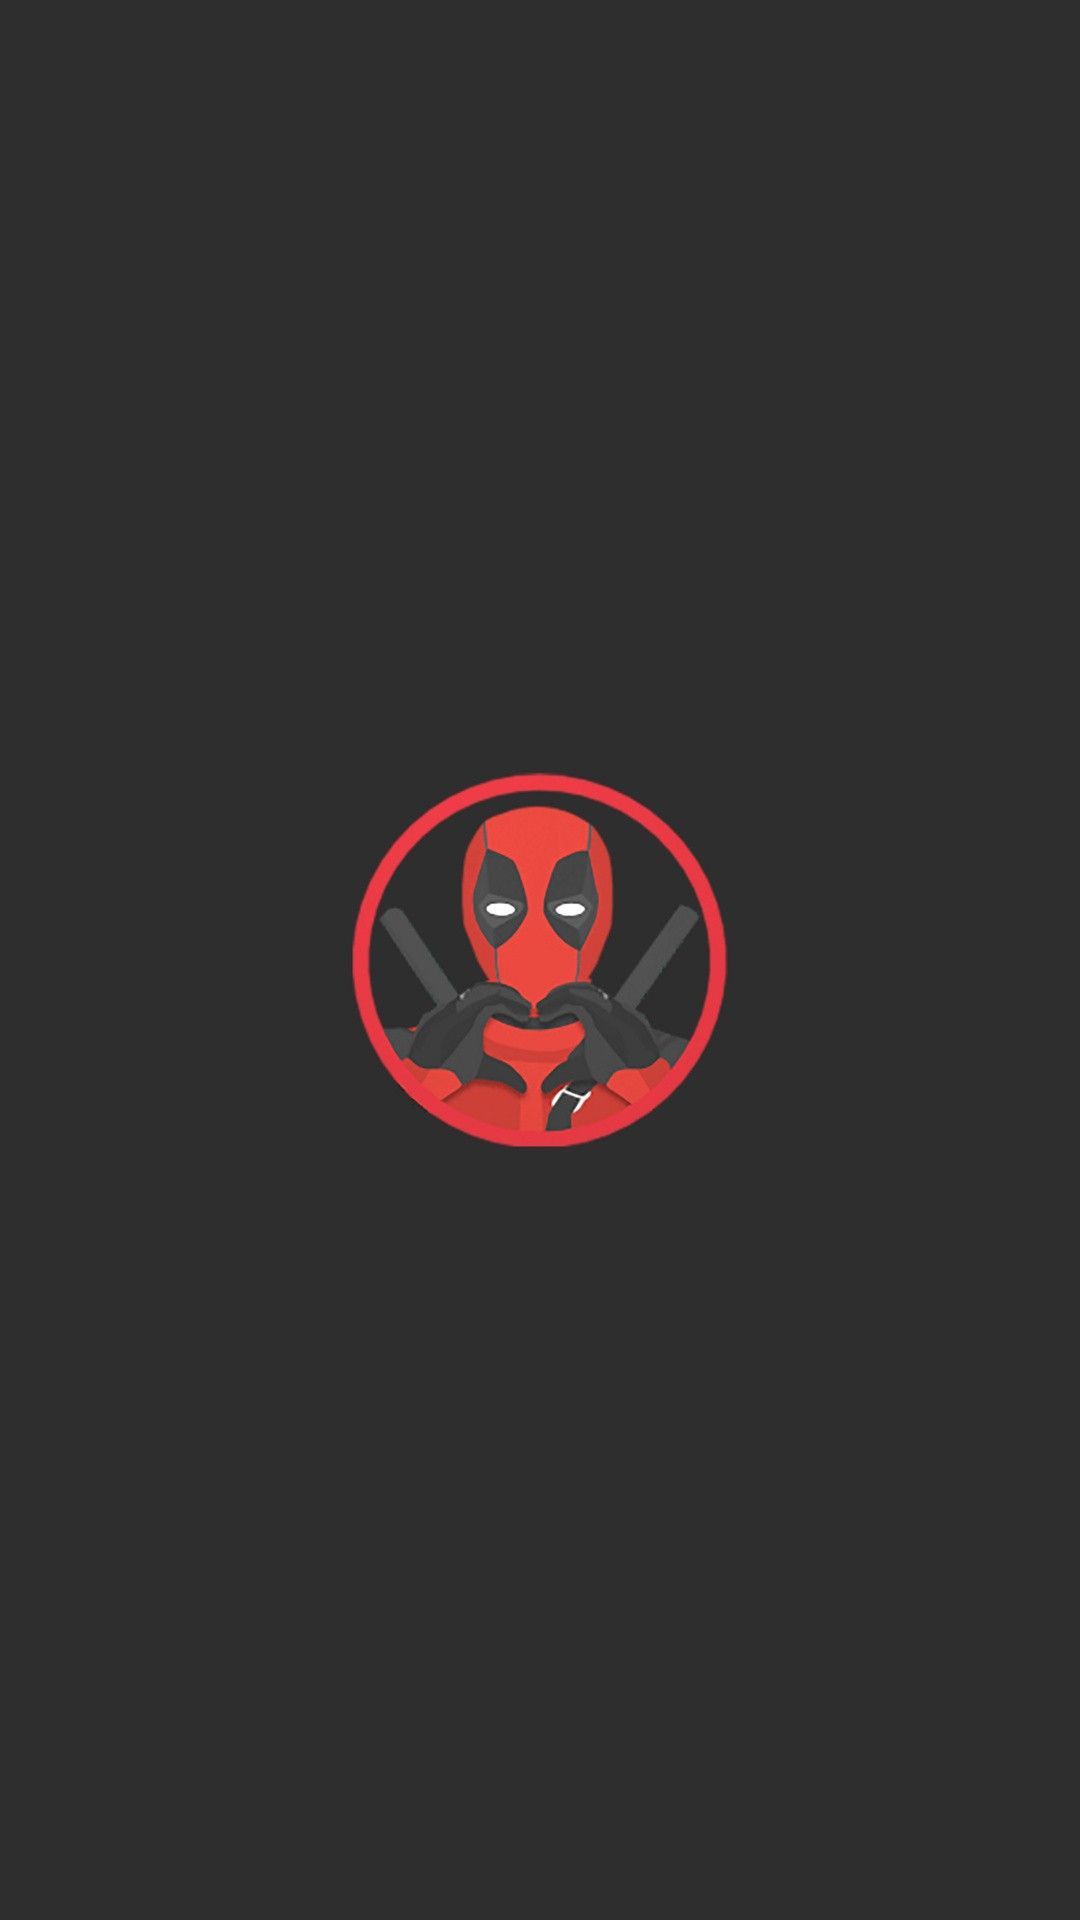 Deadpool wallpaper for android